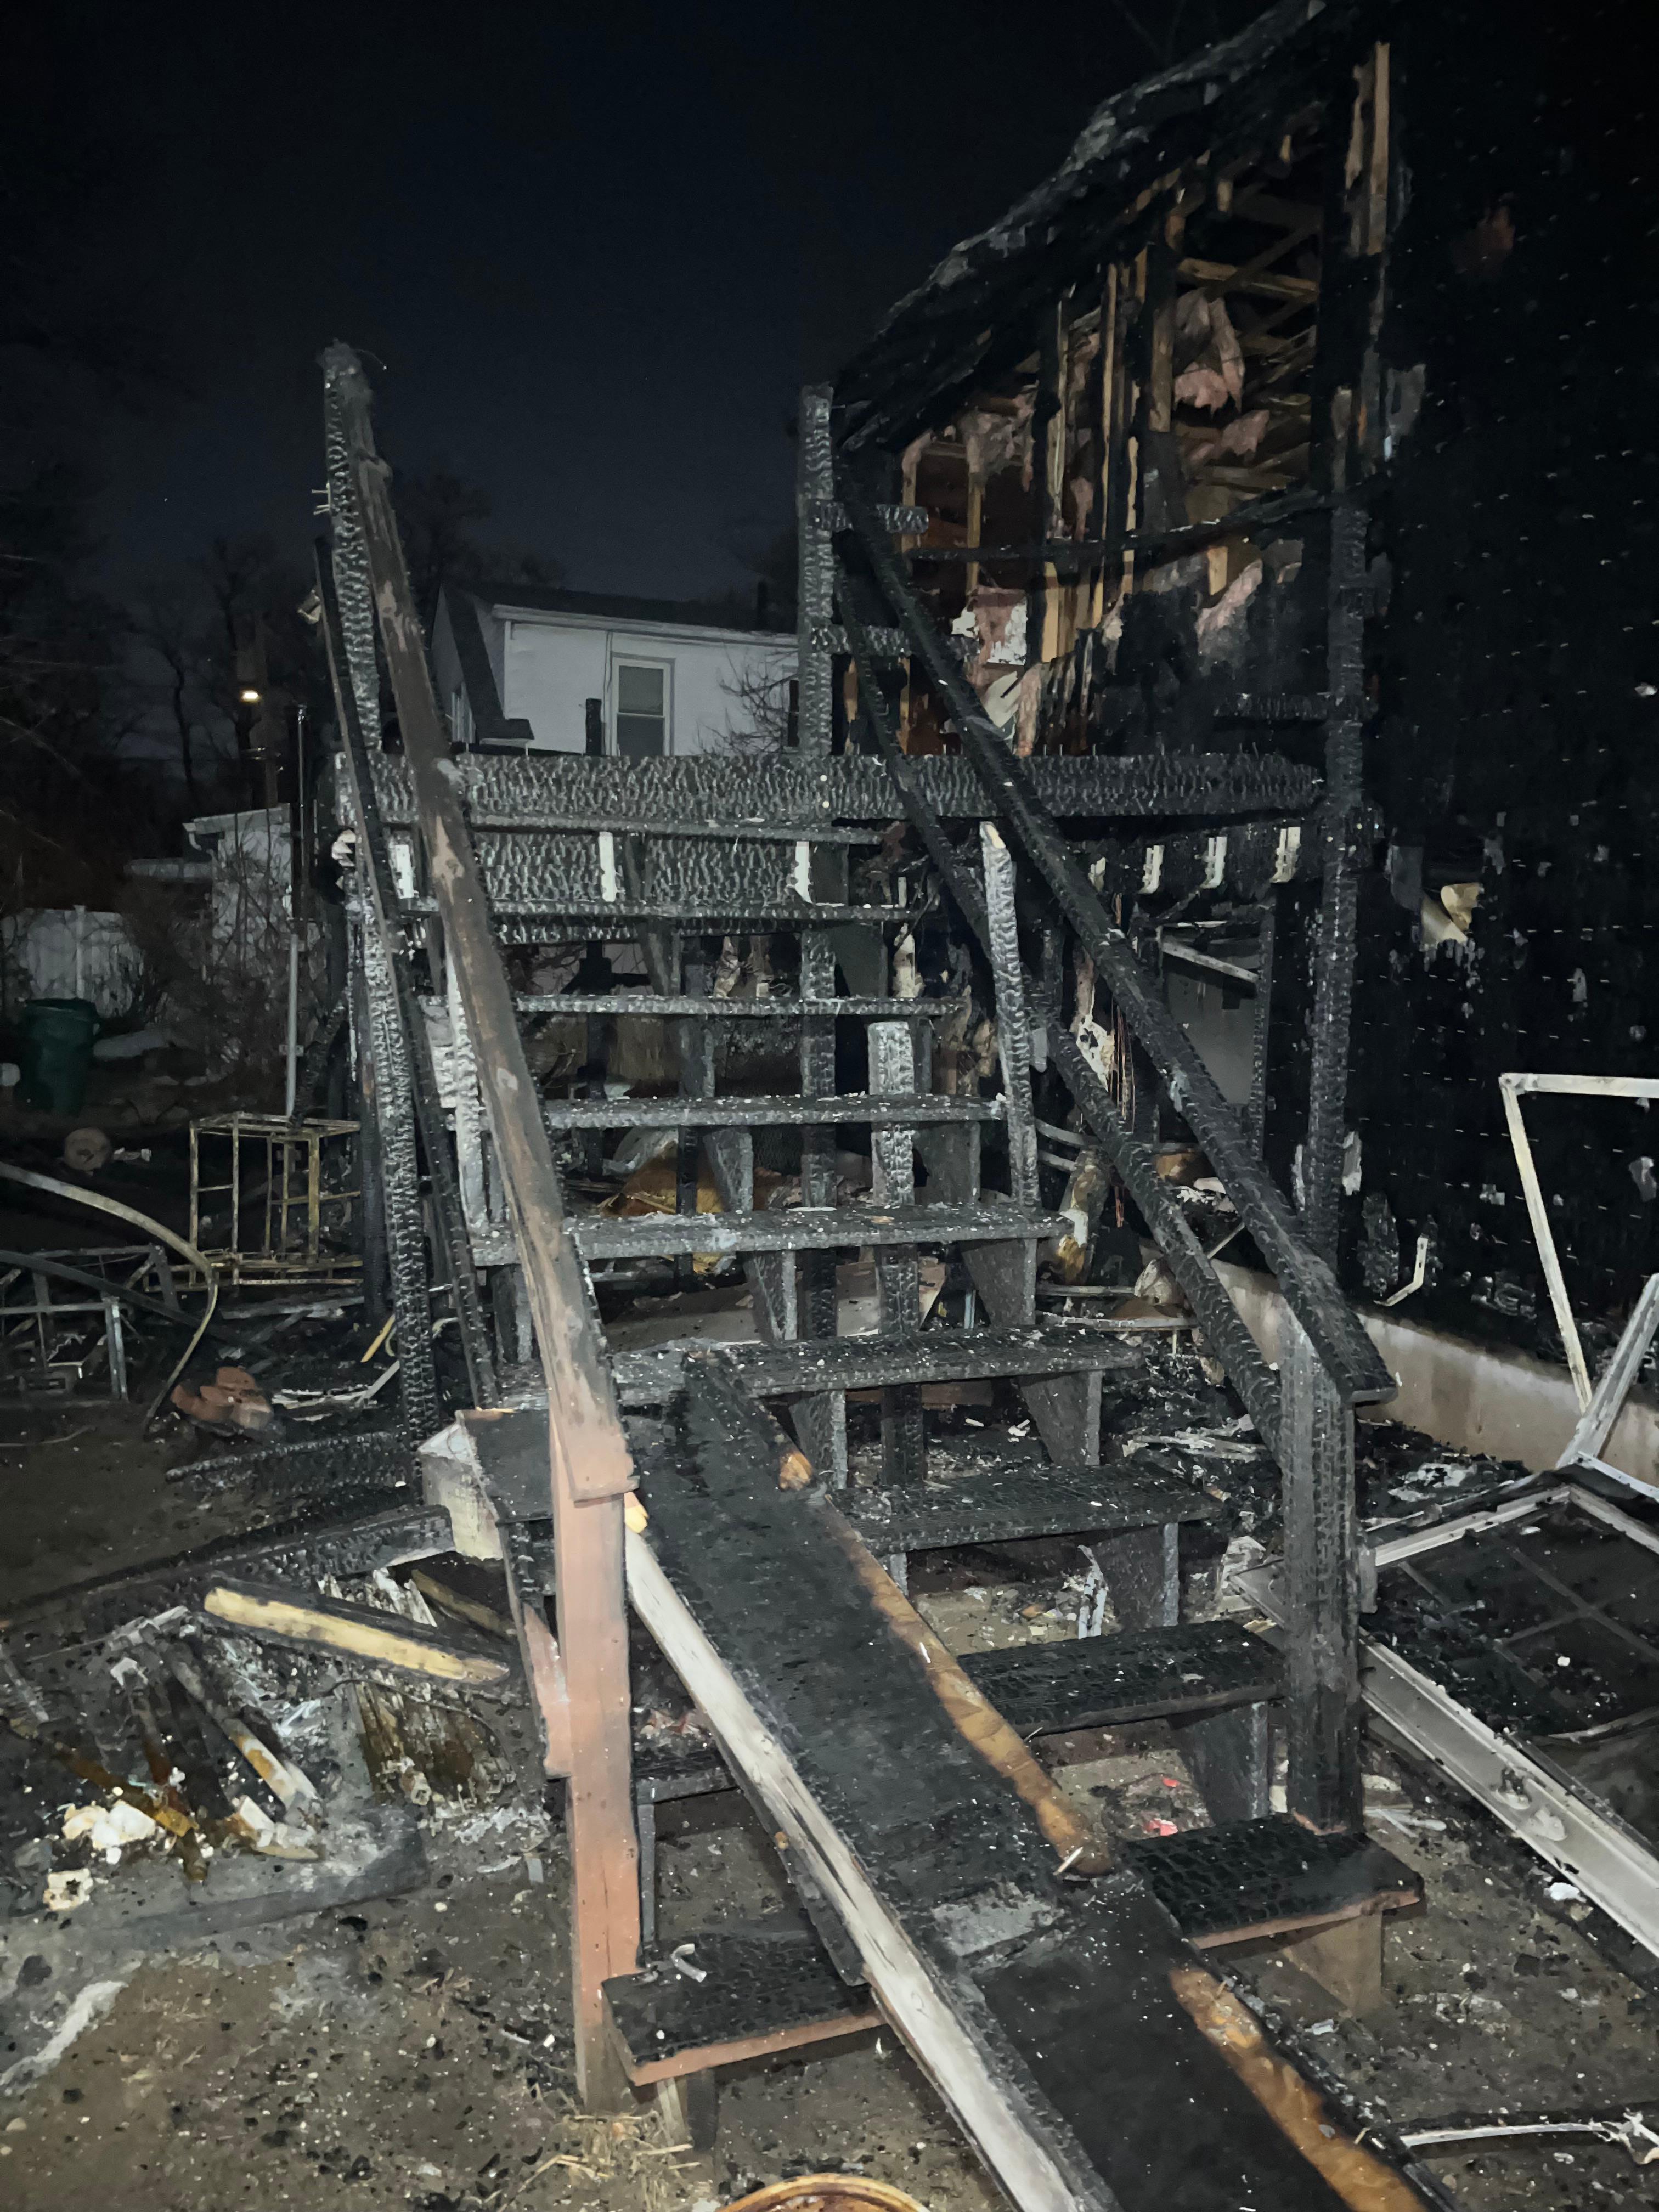 Fire Damage Restoration Services: At SERVPRO of Providence, we understand how devastating a fire can be for homeowners and businesses. Our trained technicians are equipped with the latest equipment and technology to restore your property to pre-fire condition as quickly as possible. Give us a call to schedule services! 